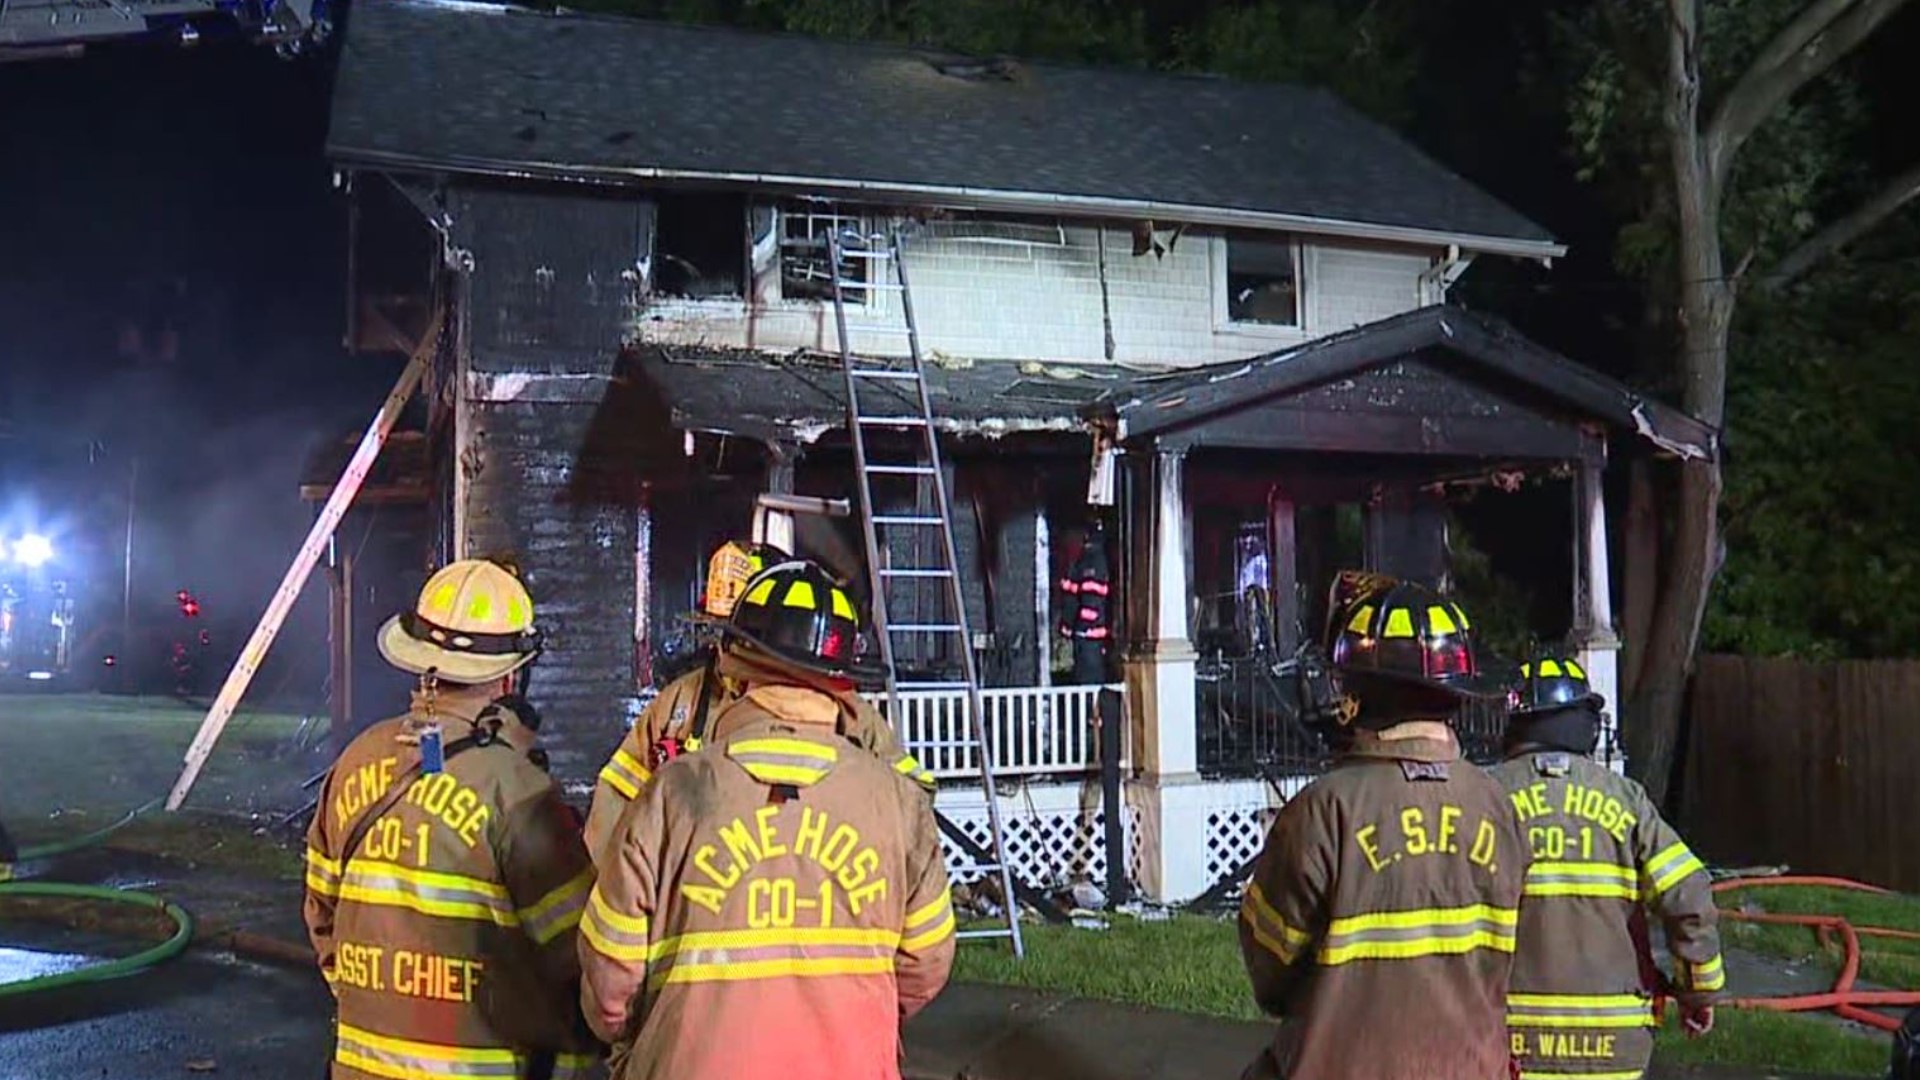 A fire gutted a home in Stroudsburg early Tuesday morning.